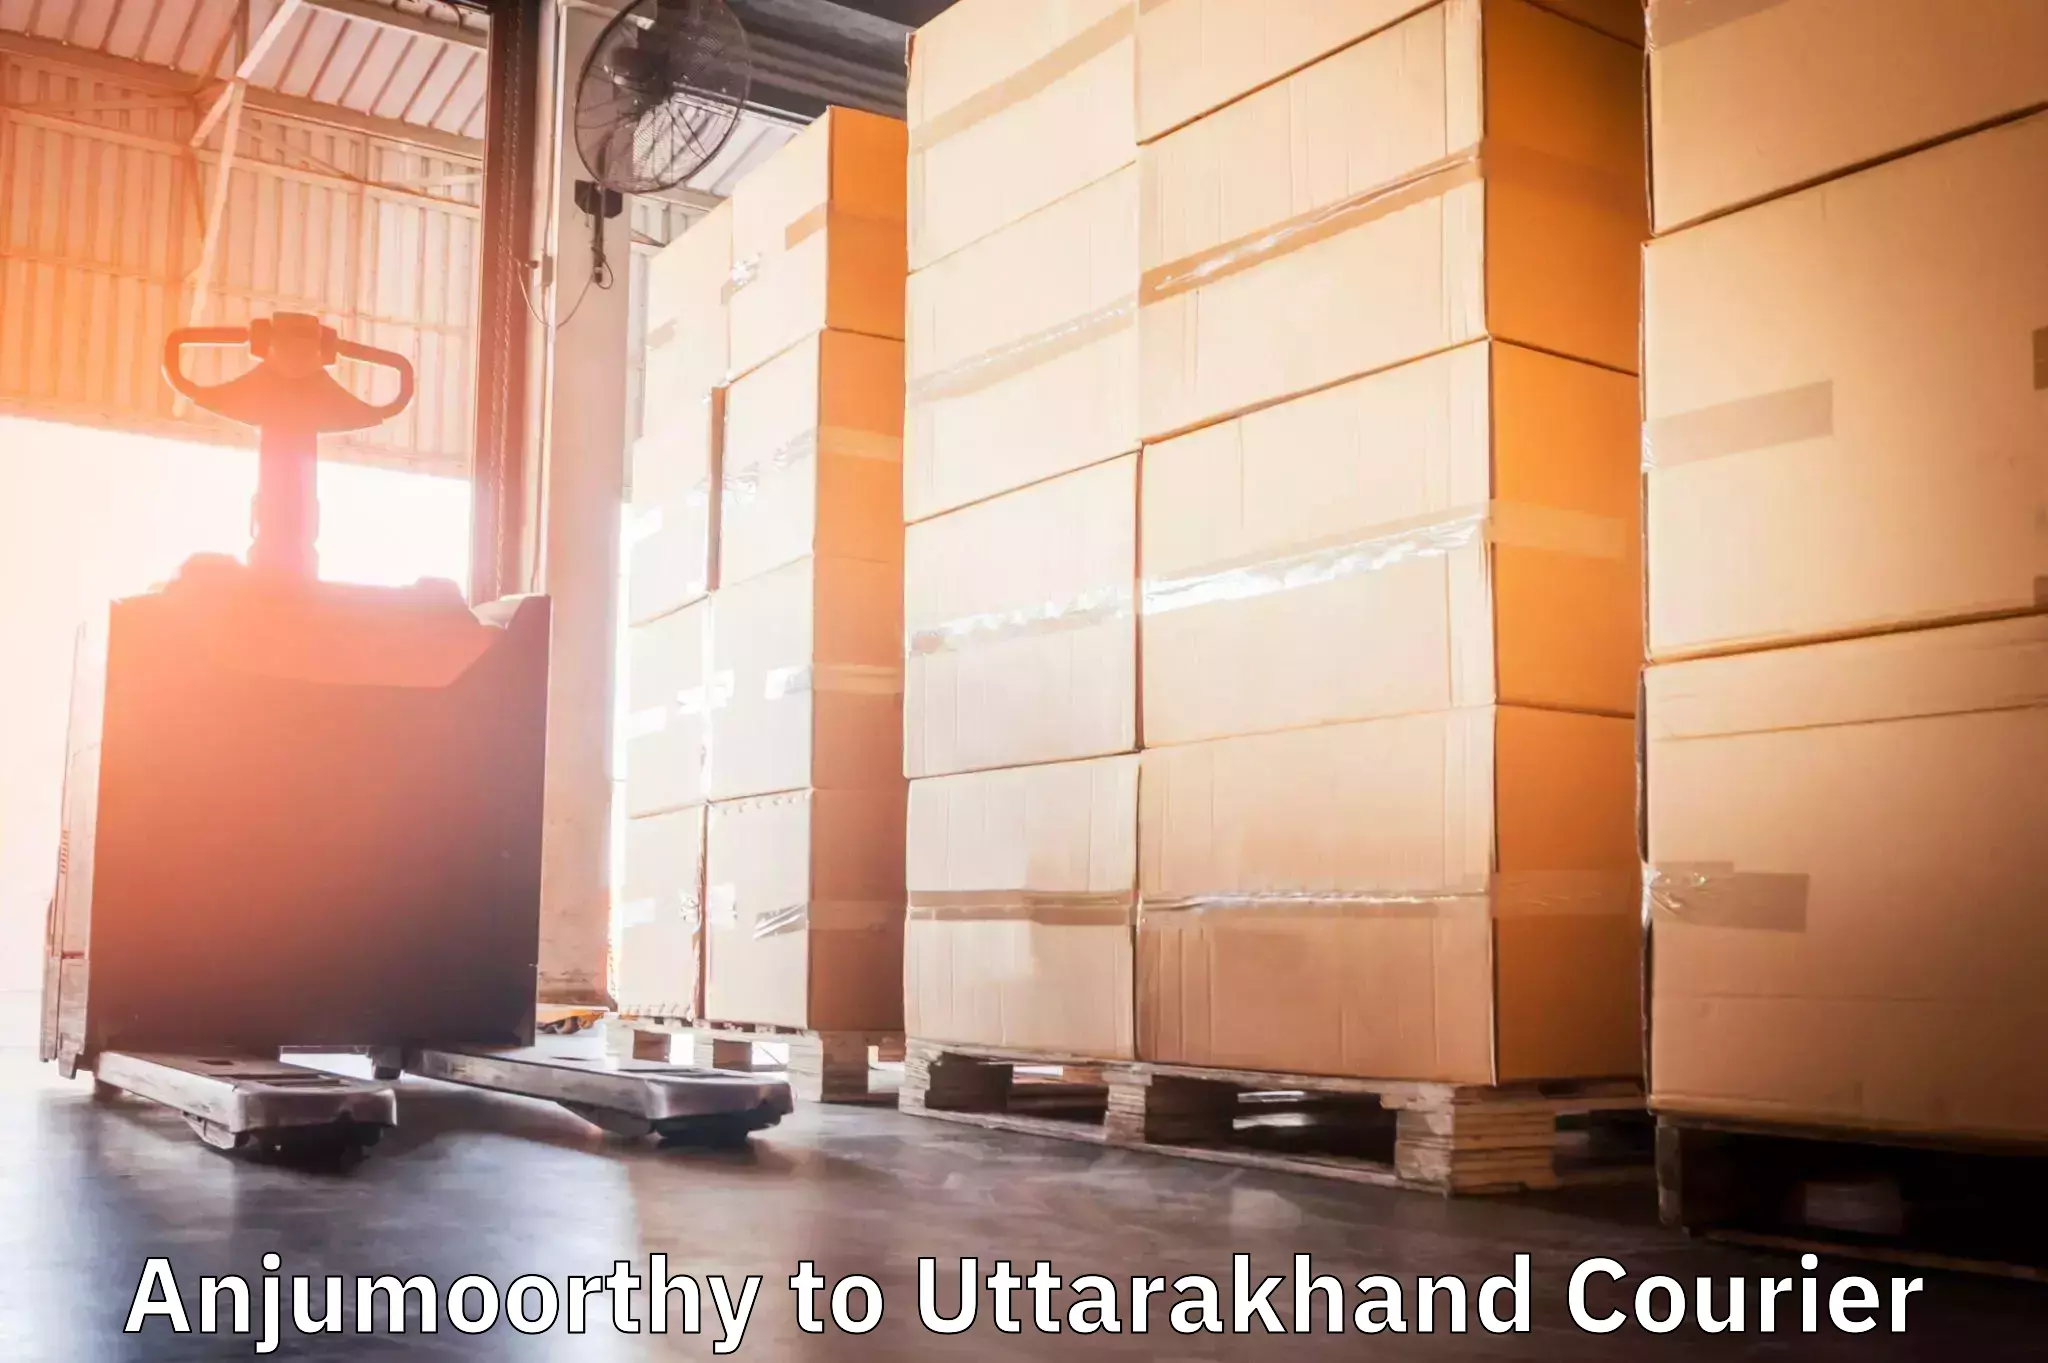 Parcel delivery automation Anjumoorthy to Rudrapur